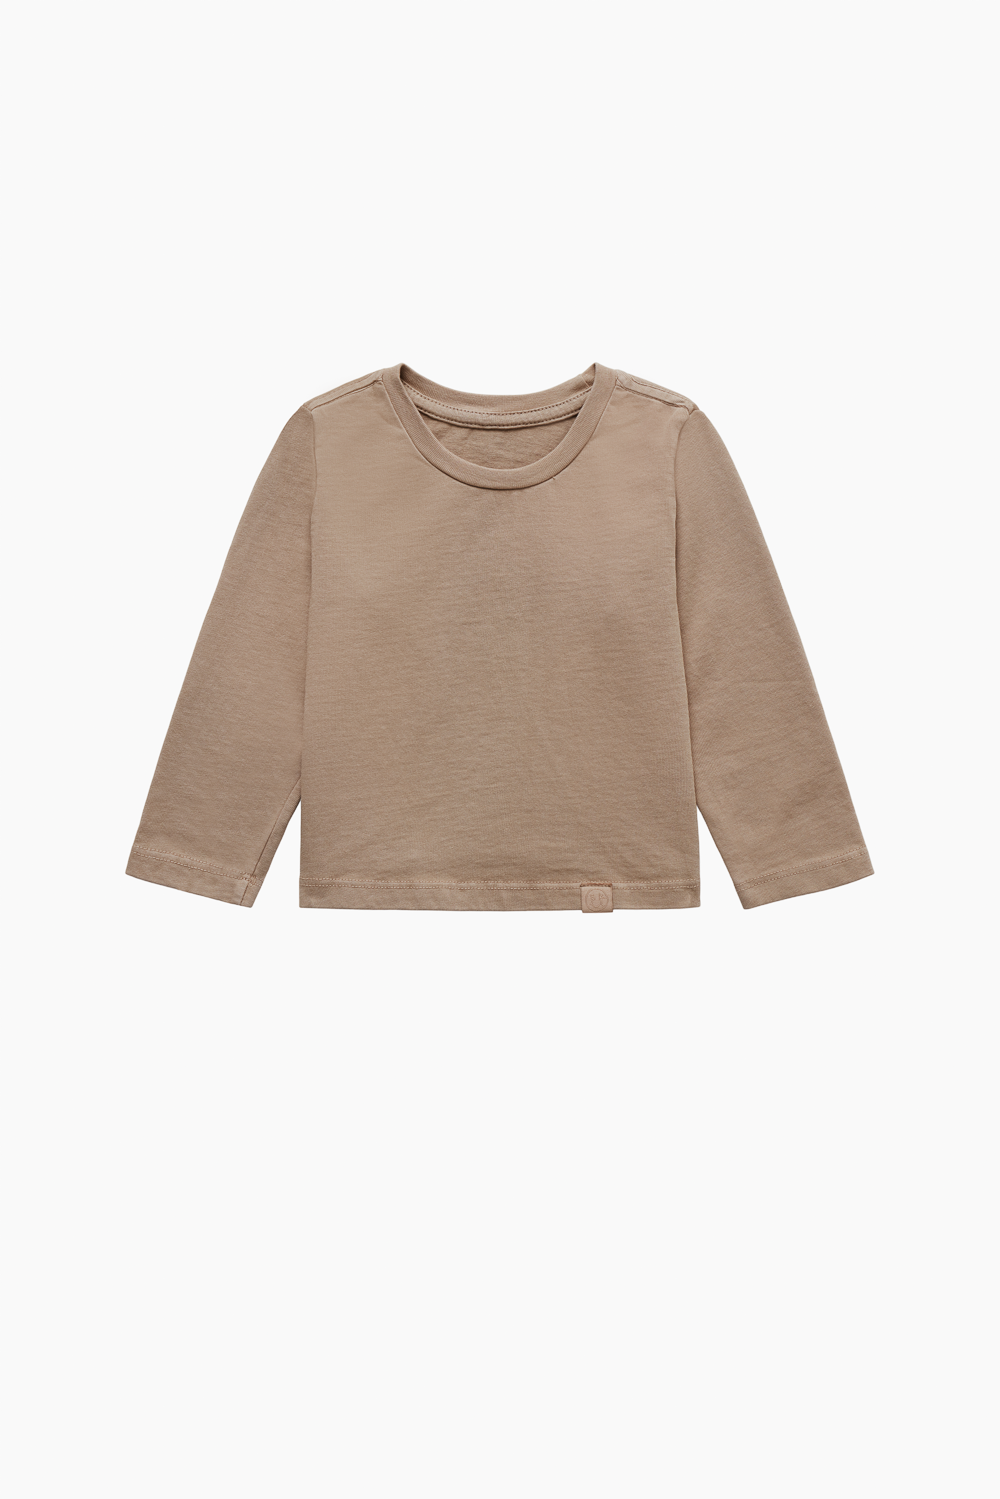 HEAVY COTTON KIDS LONG SLEEVE - MAPLE Featured Image